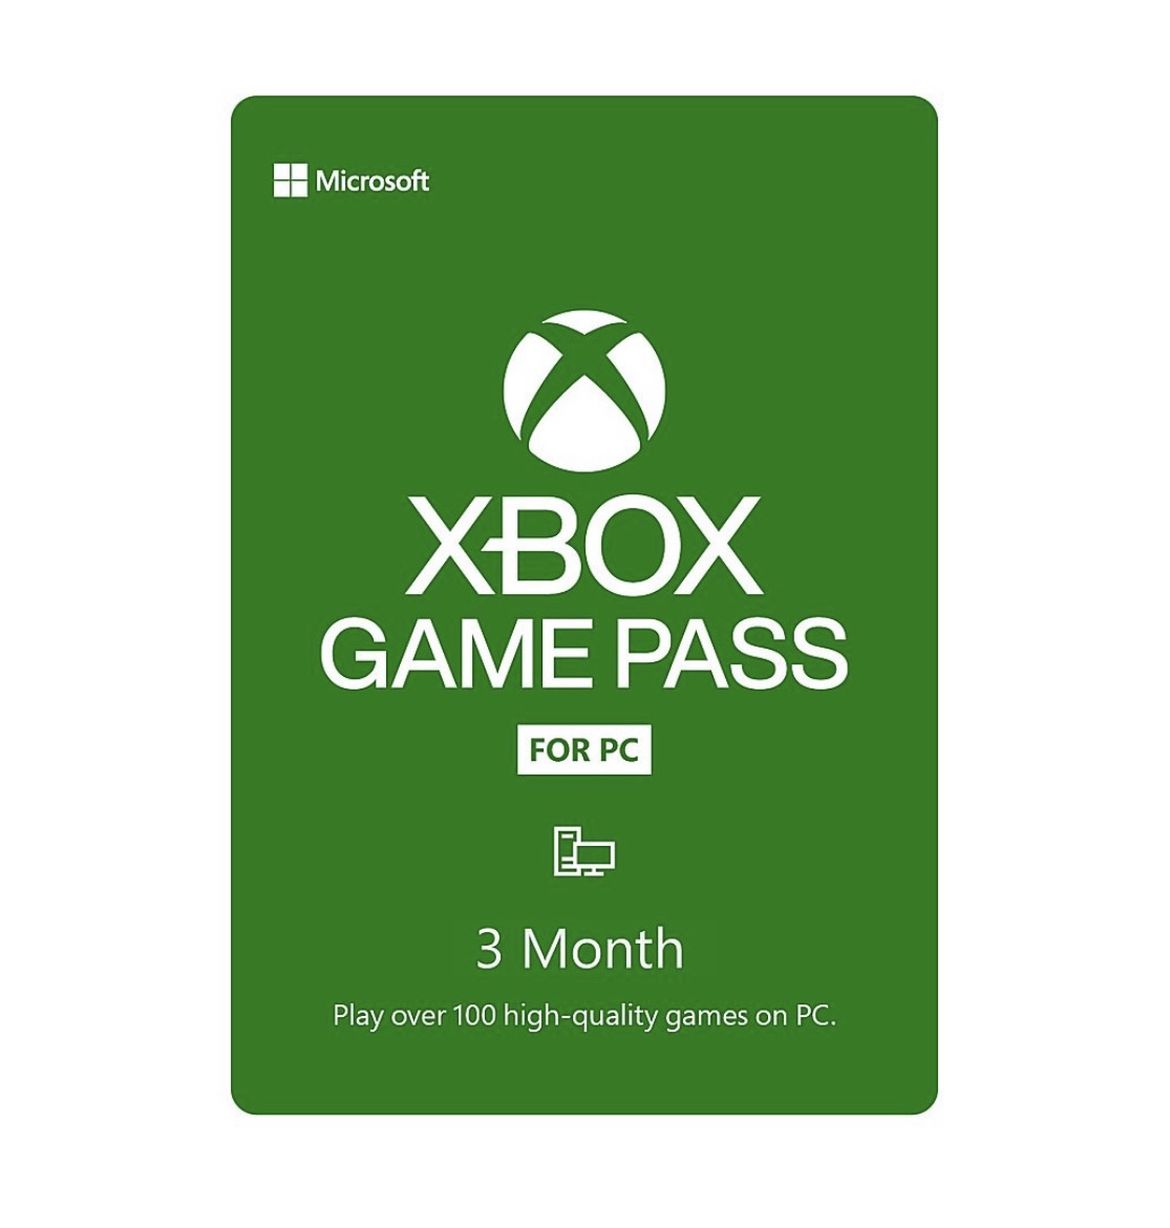 Microsoft Xbox Game Pass For PC 3 Month Membership